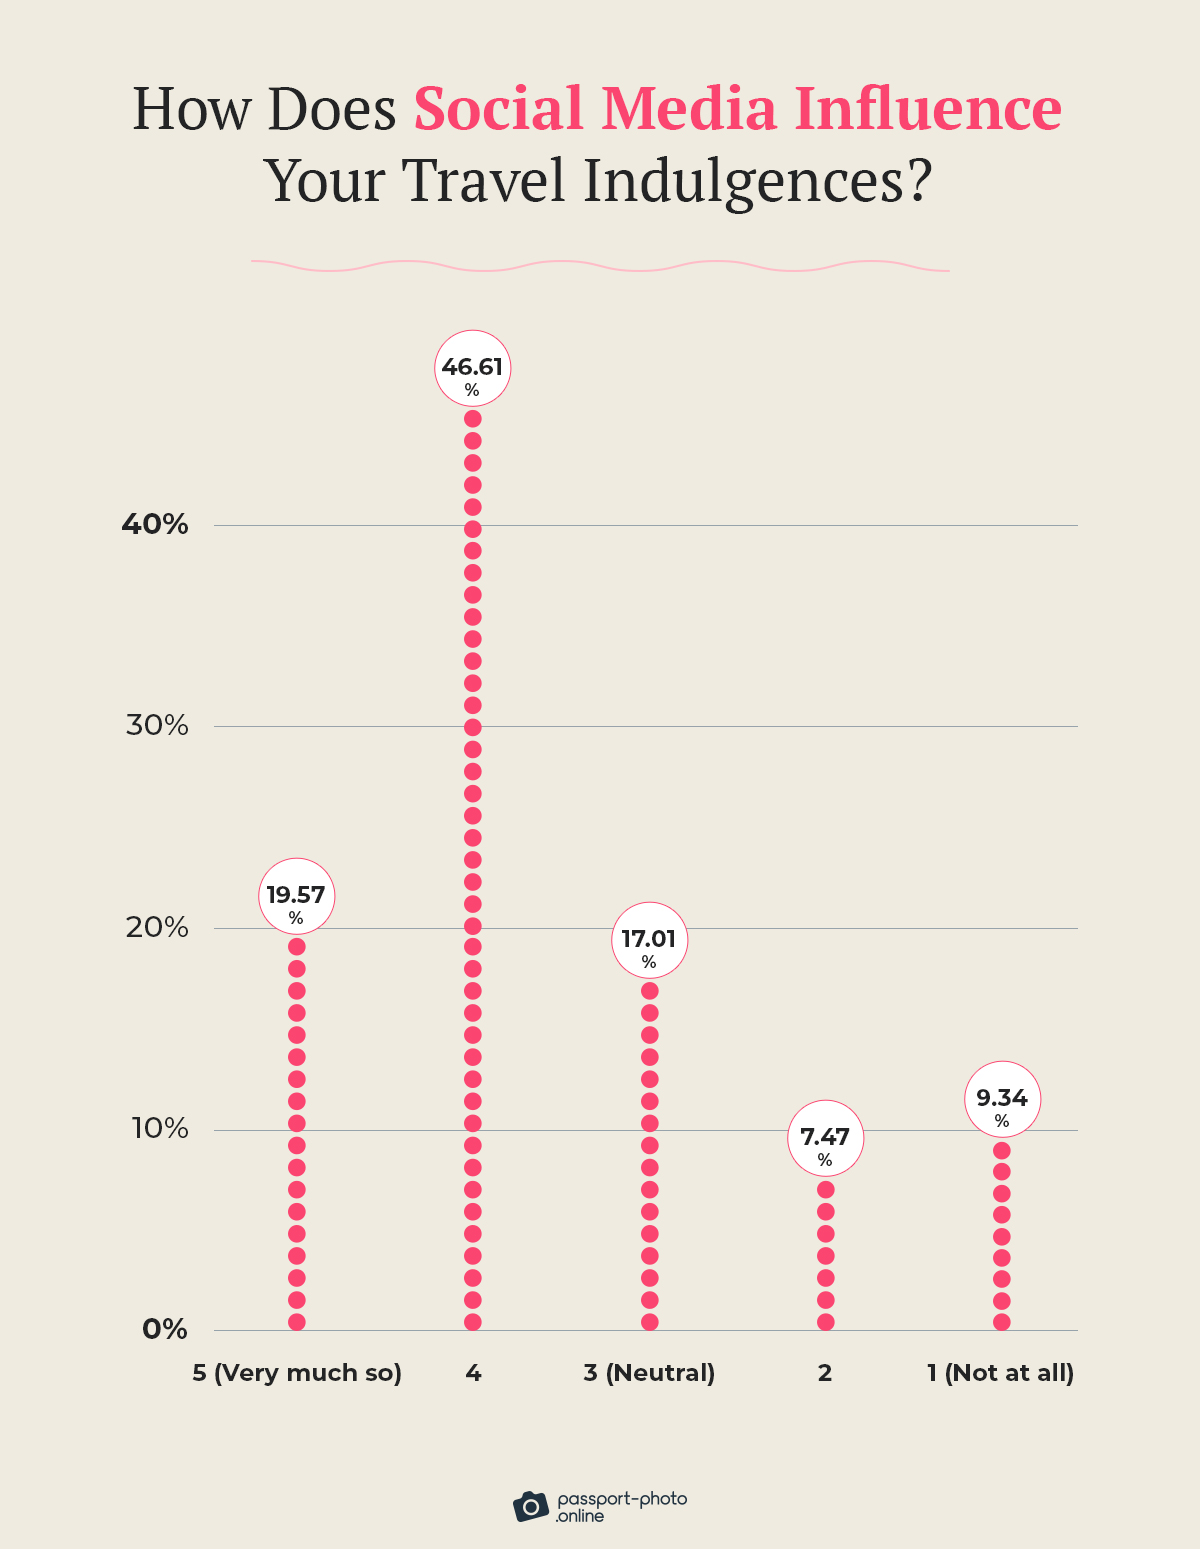 The extent to which social media influences travelers' indulgences